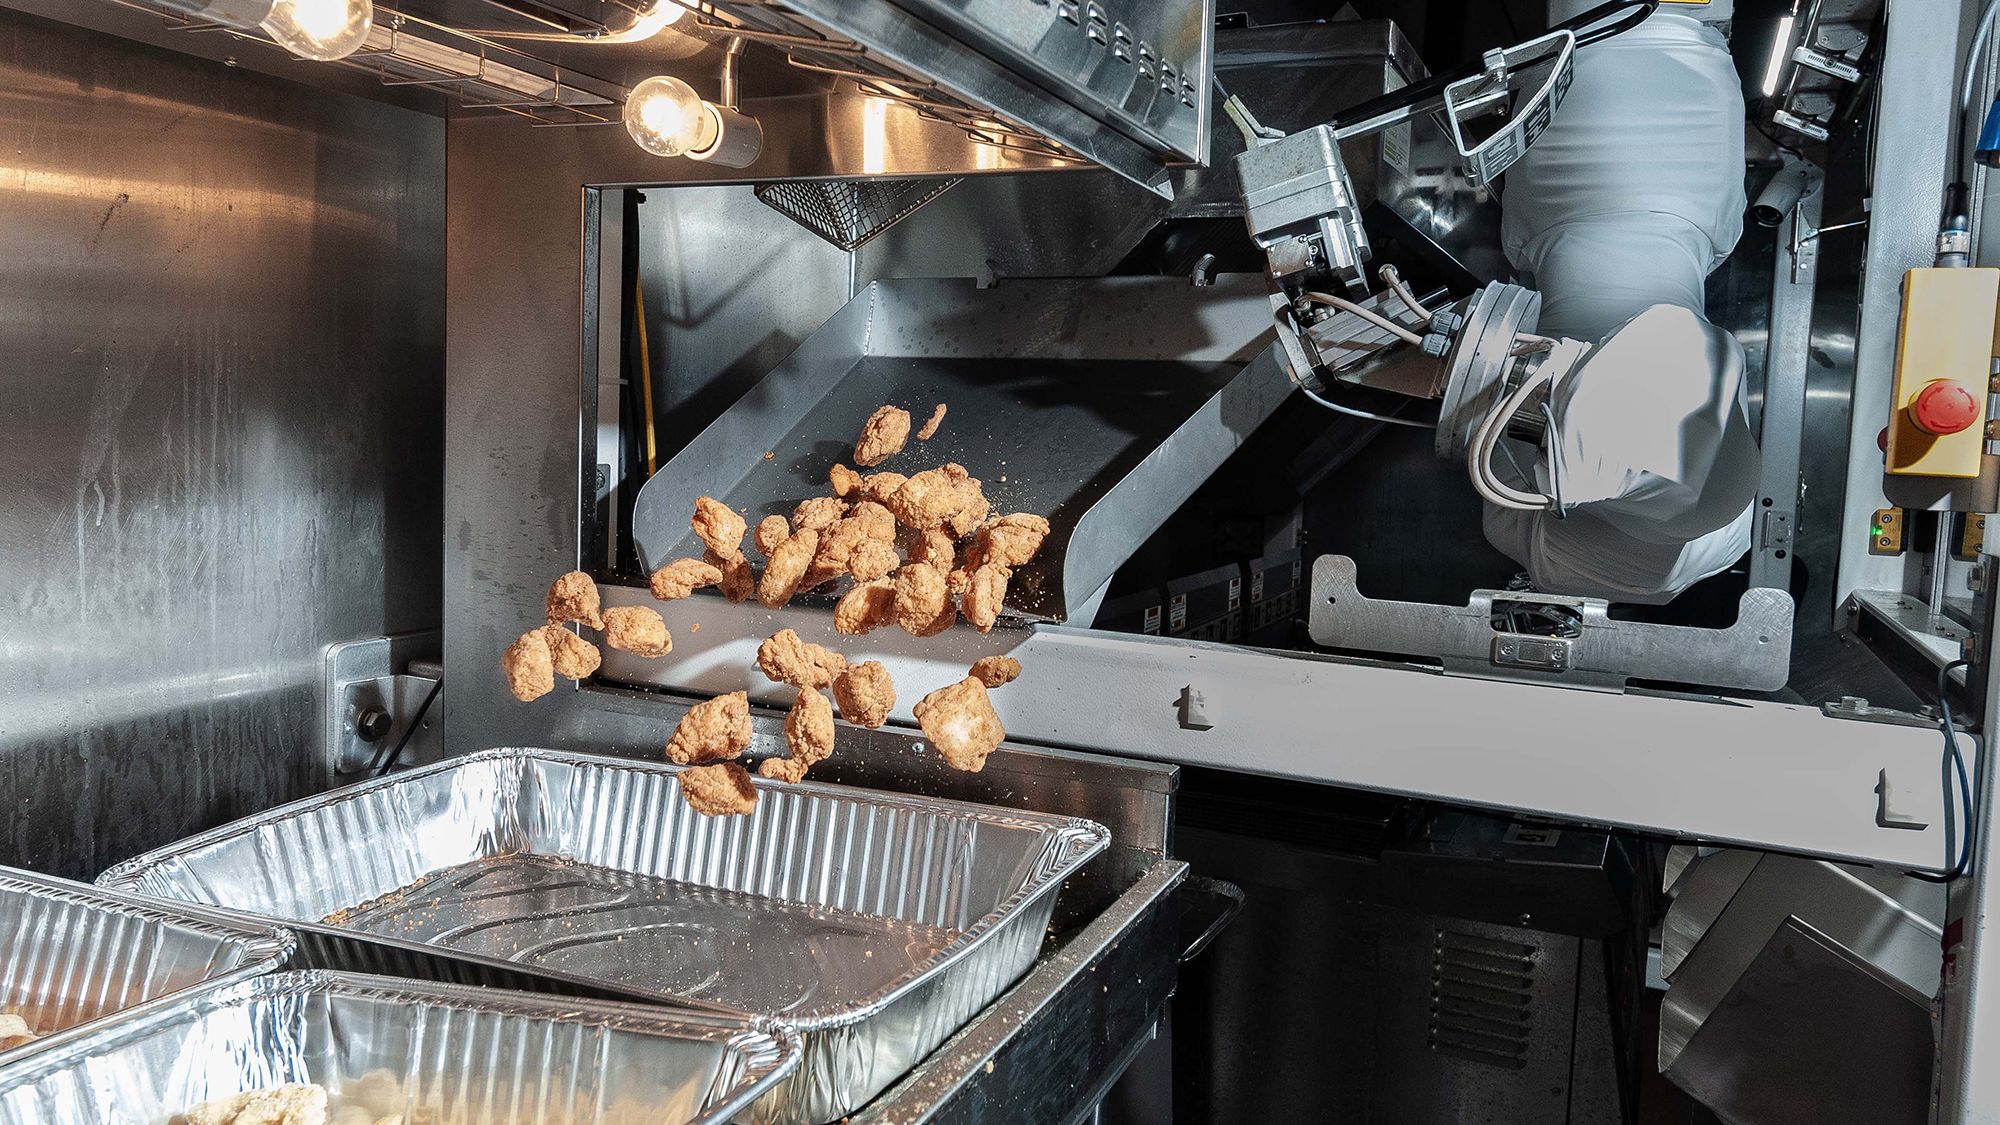 Kitchen Robot Gives Chef Four Extra Pairs Of Hands